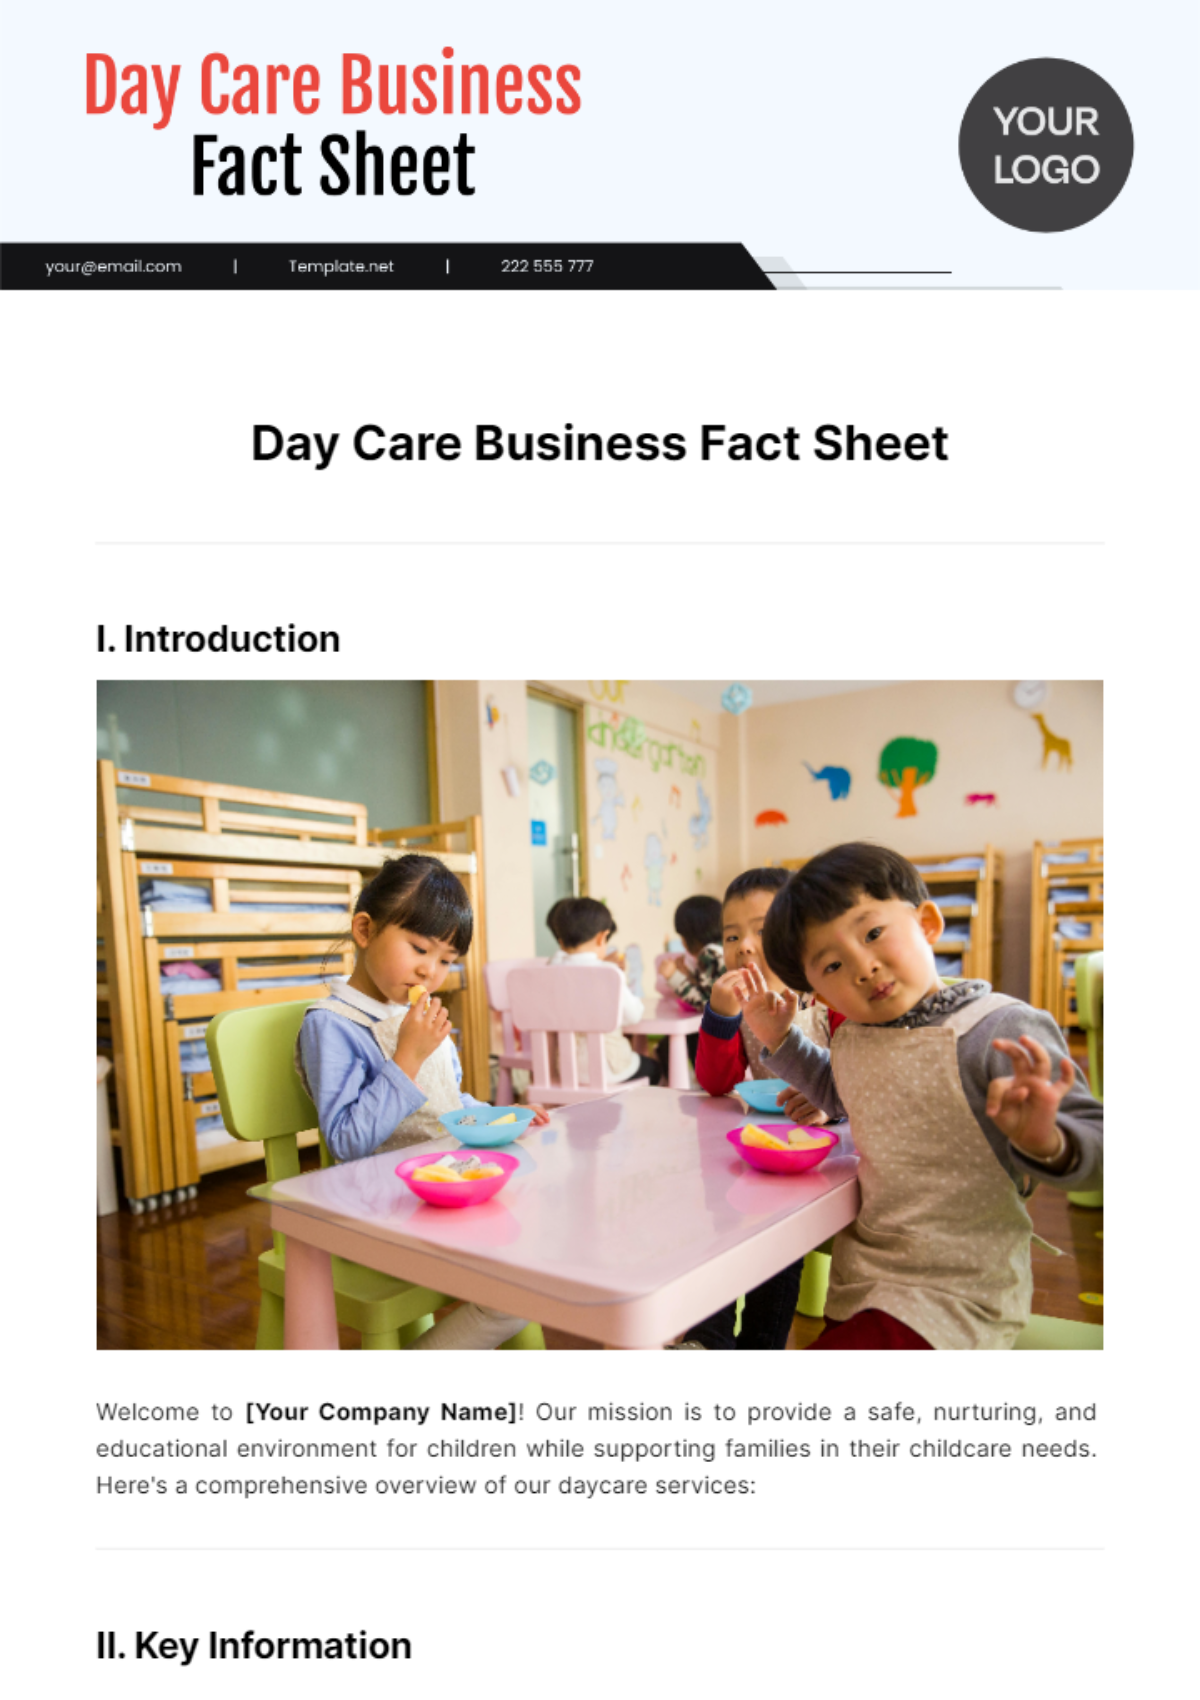 Day Care Business Fact Sheet Template